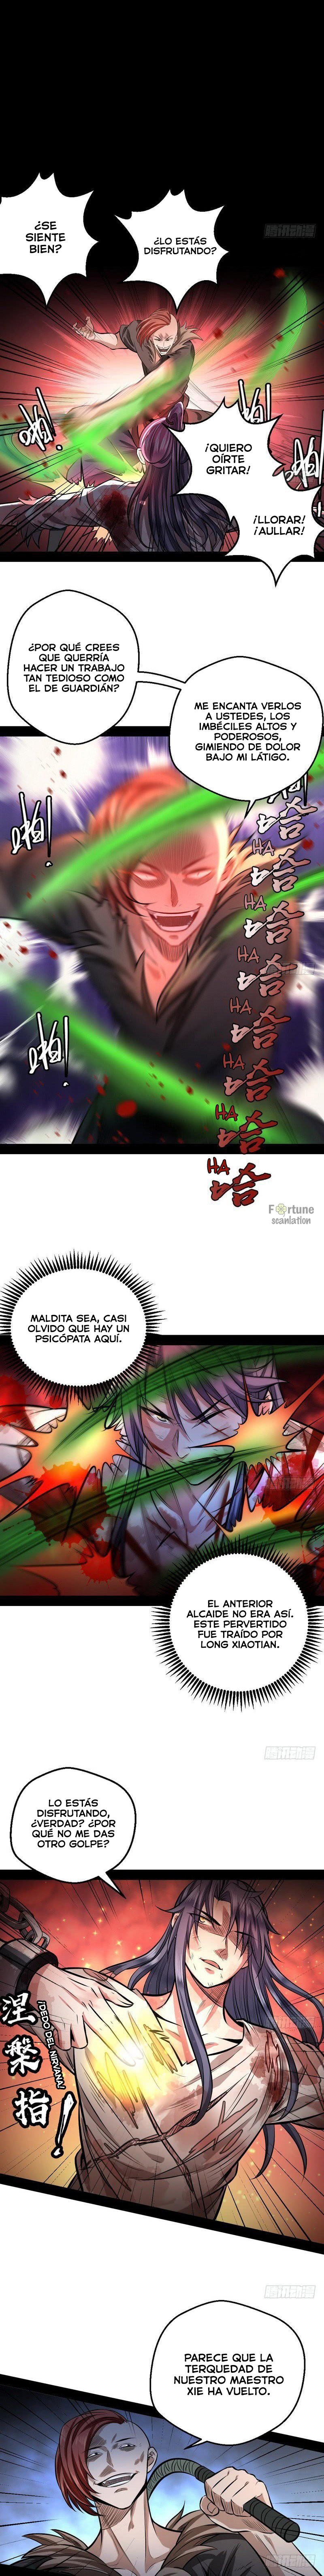 Manga Soy un dios maligno Chapter 34 image number 21